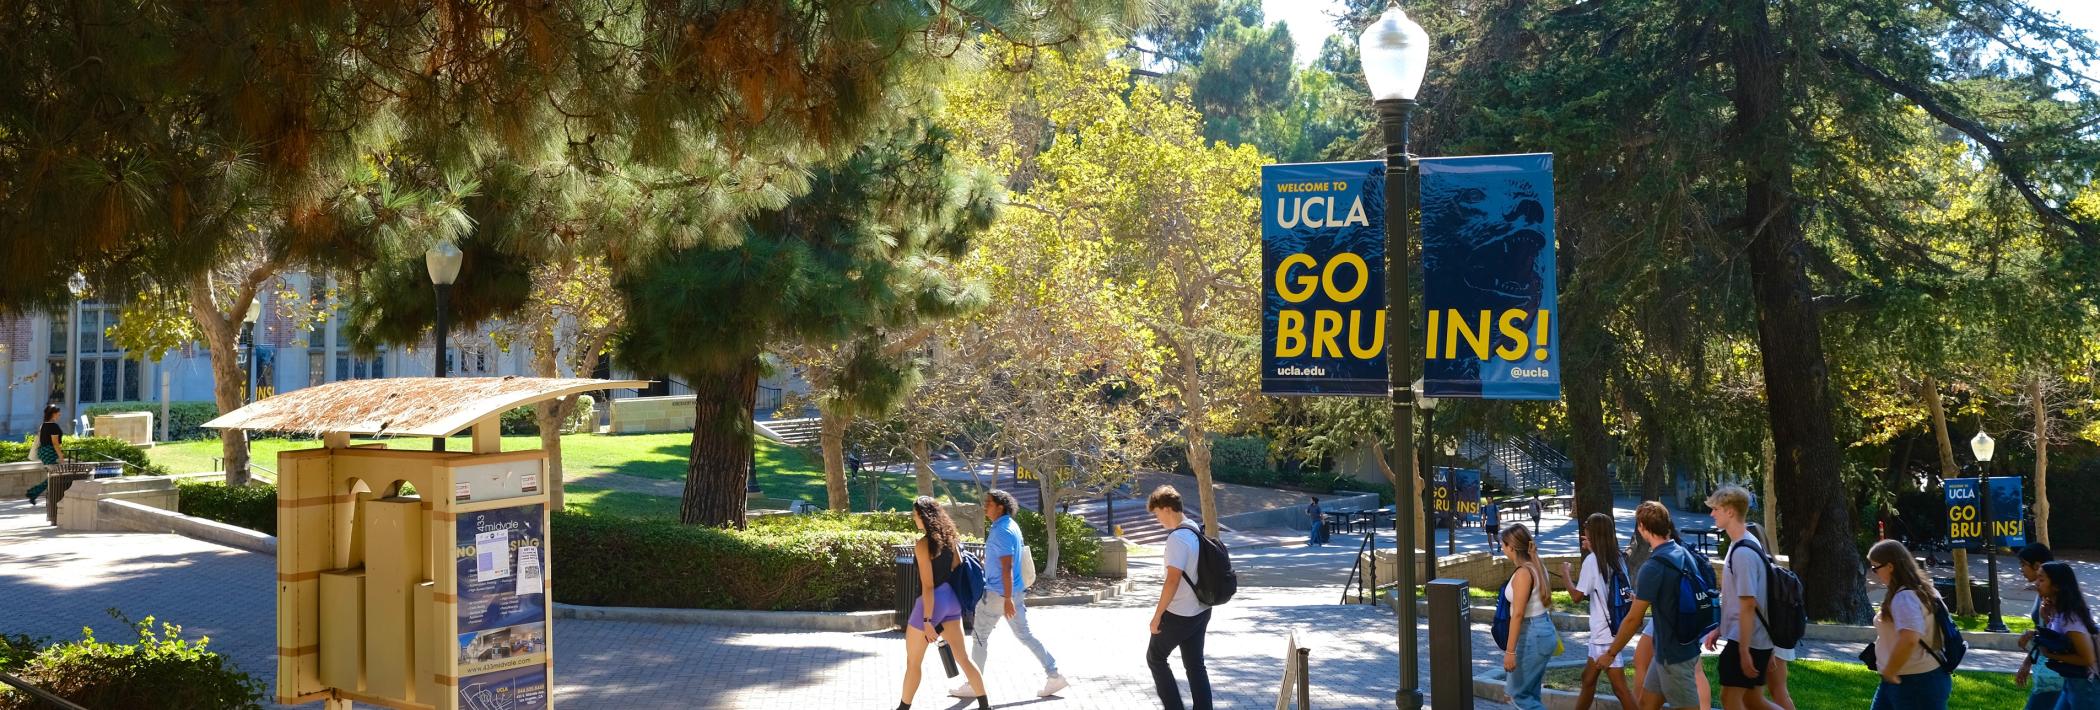 Students walking on a walkway lined by evergreen trees. A newsstand kiosk. 